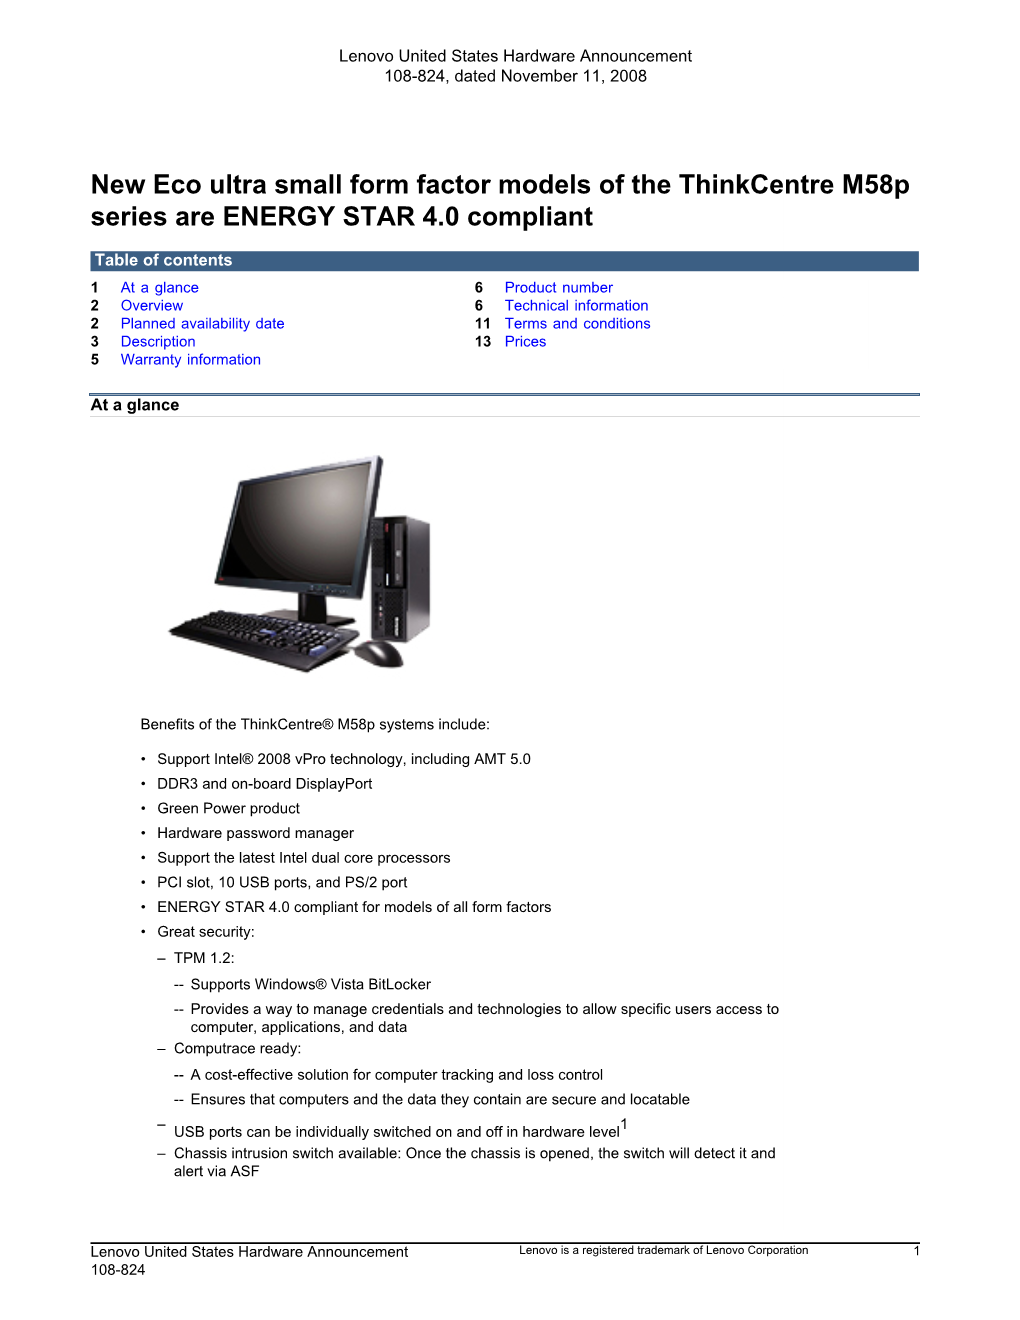 New Eco Ultra Small Form Factor Models of the Thinkcentre M58p Series Are ENERGY STAR 4.0 Compliant